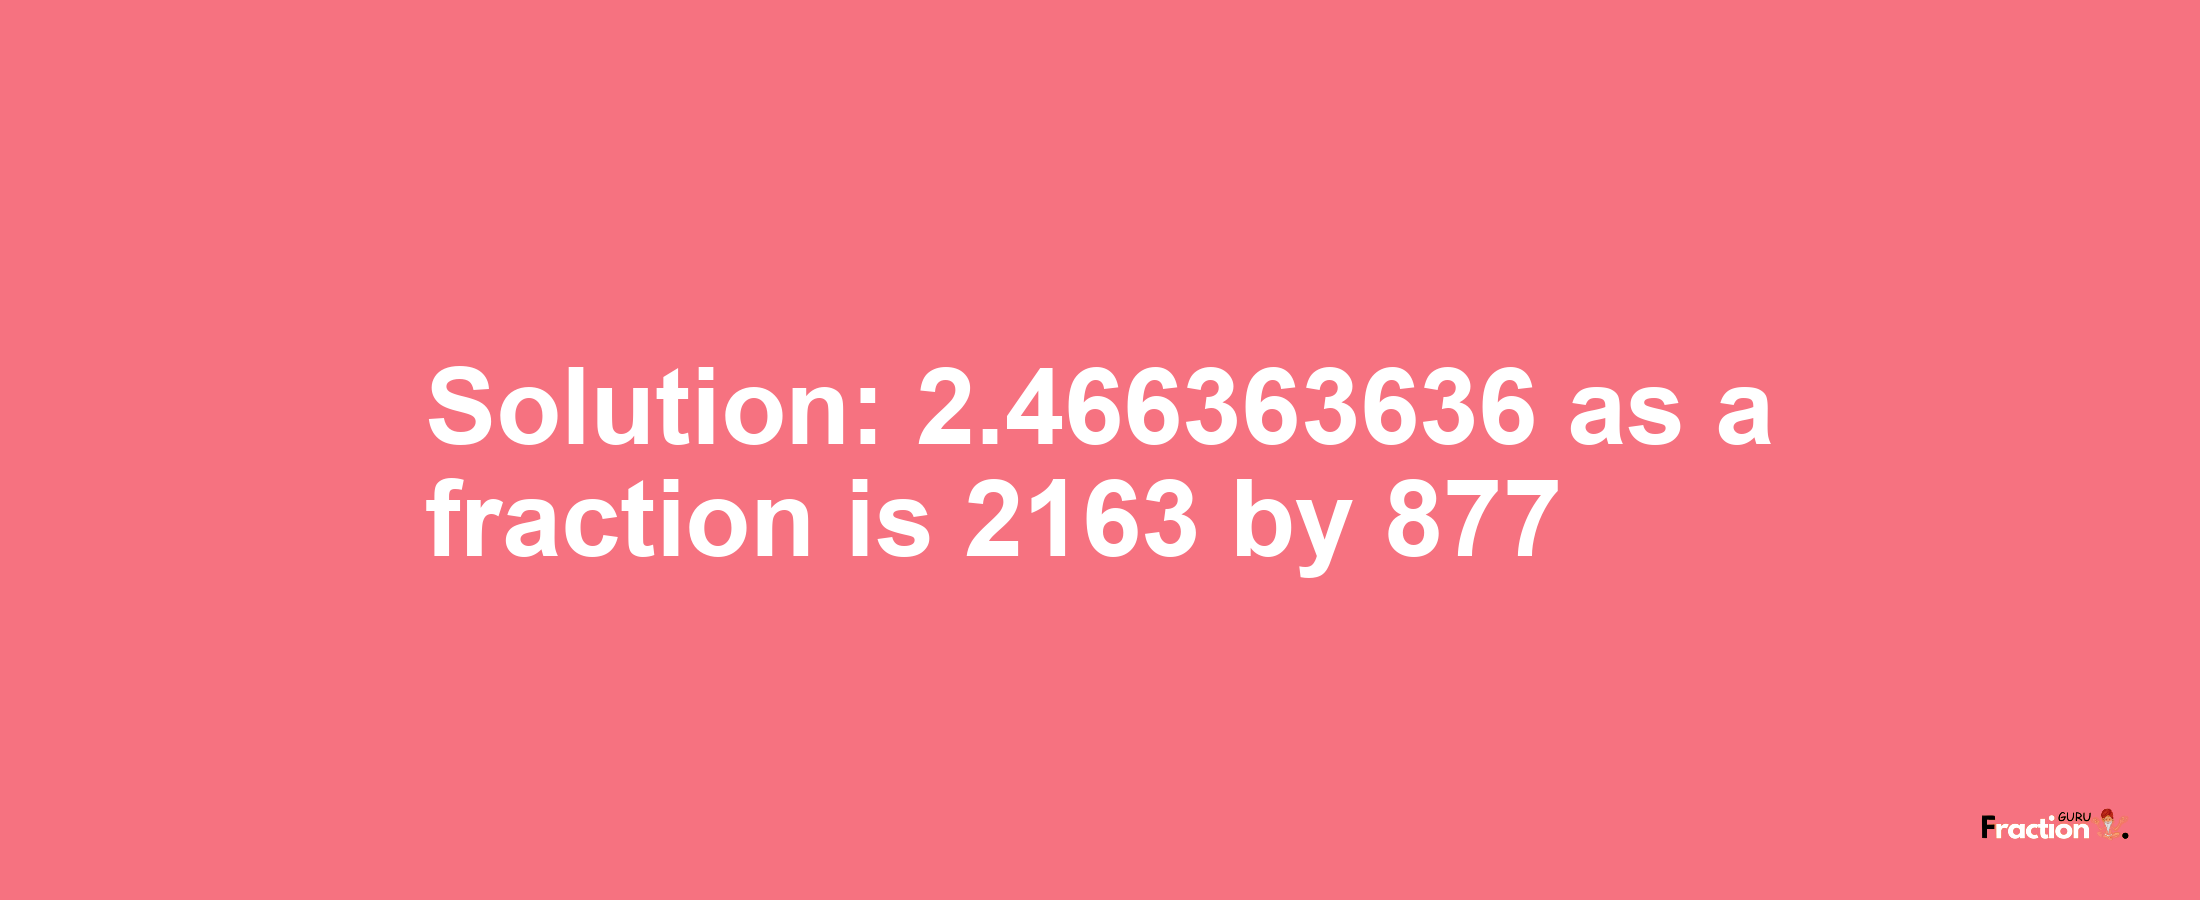 Solution:2.466363636 as a fraction is 2163/877